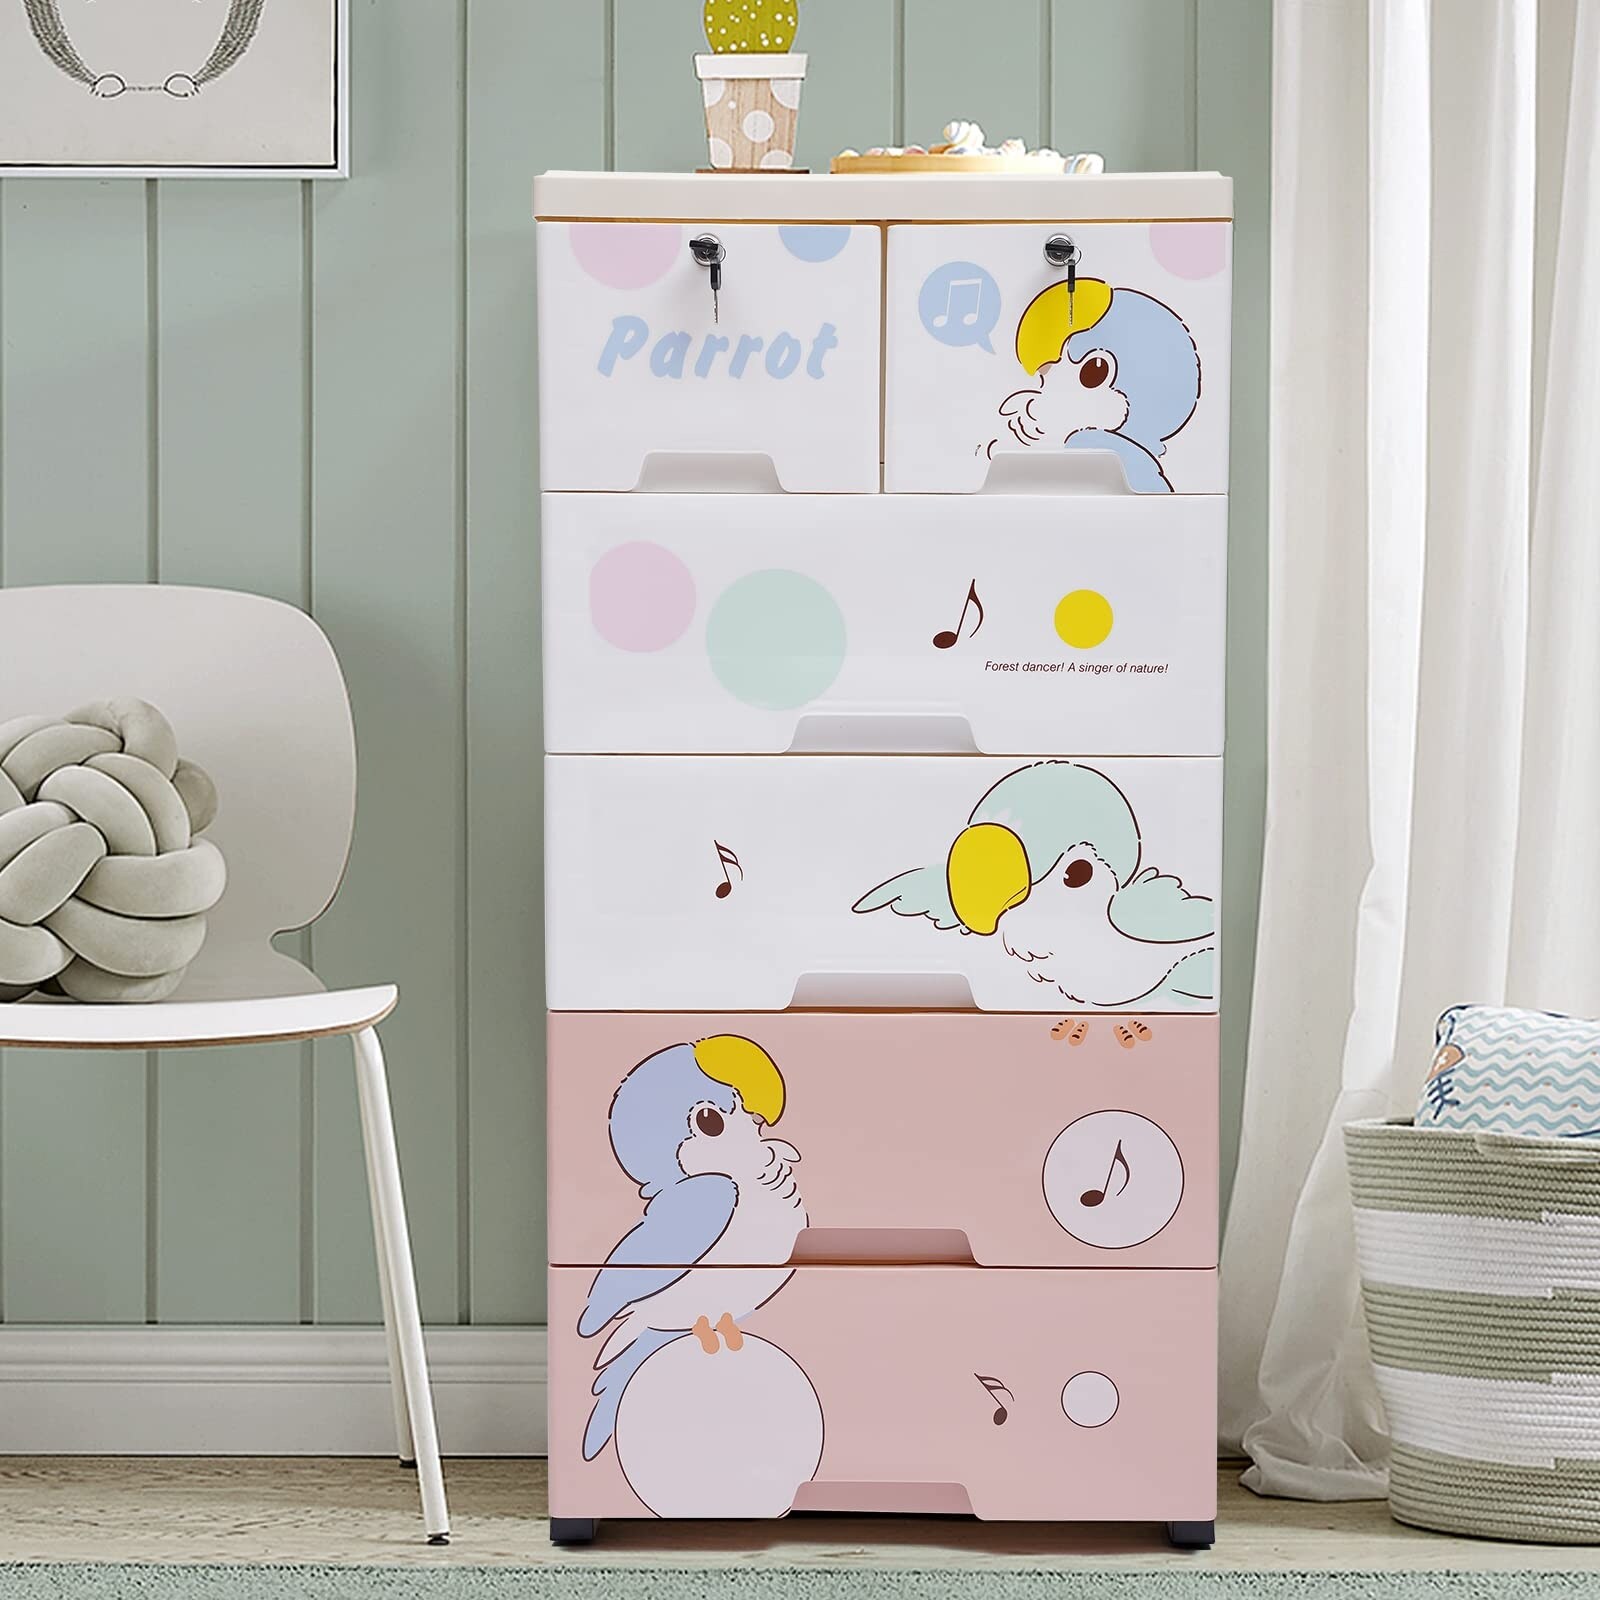 https://ak1.ostkcdn.com/images/products/is/images/direct/f76c696c35e28a0bb8d24d2517196101f08ee084/Plastic-Drawers-Dresser-Storage-Cabinet-with-6-Drawers%2CCloset-Dresser-Organizer%2CStackable-Vertical-Clothes-Storage.jpg